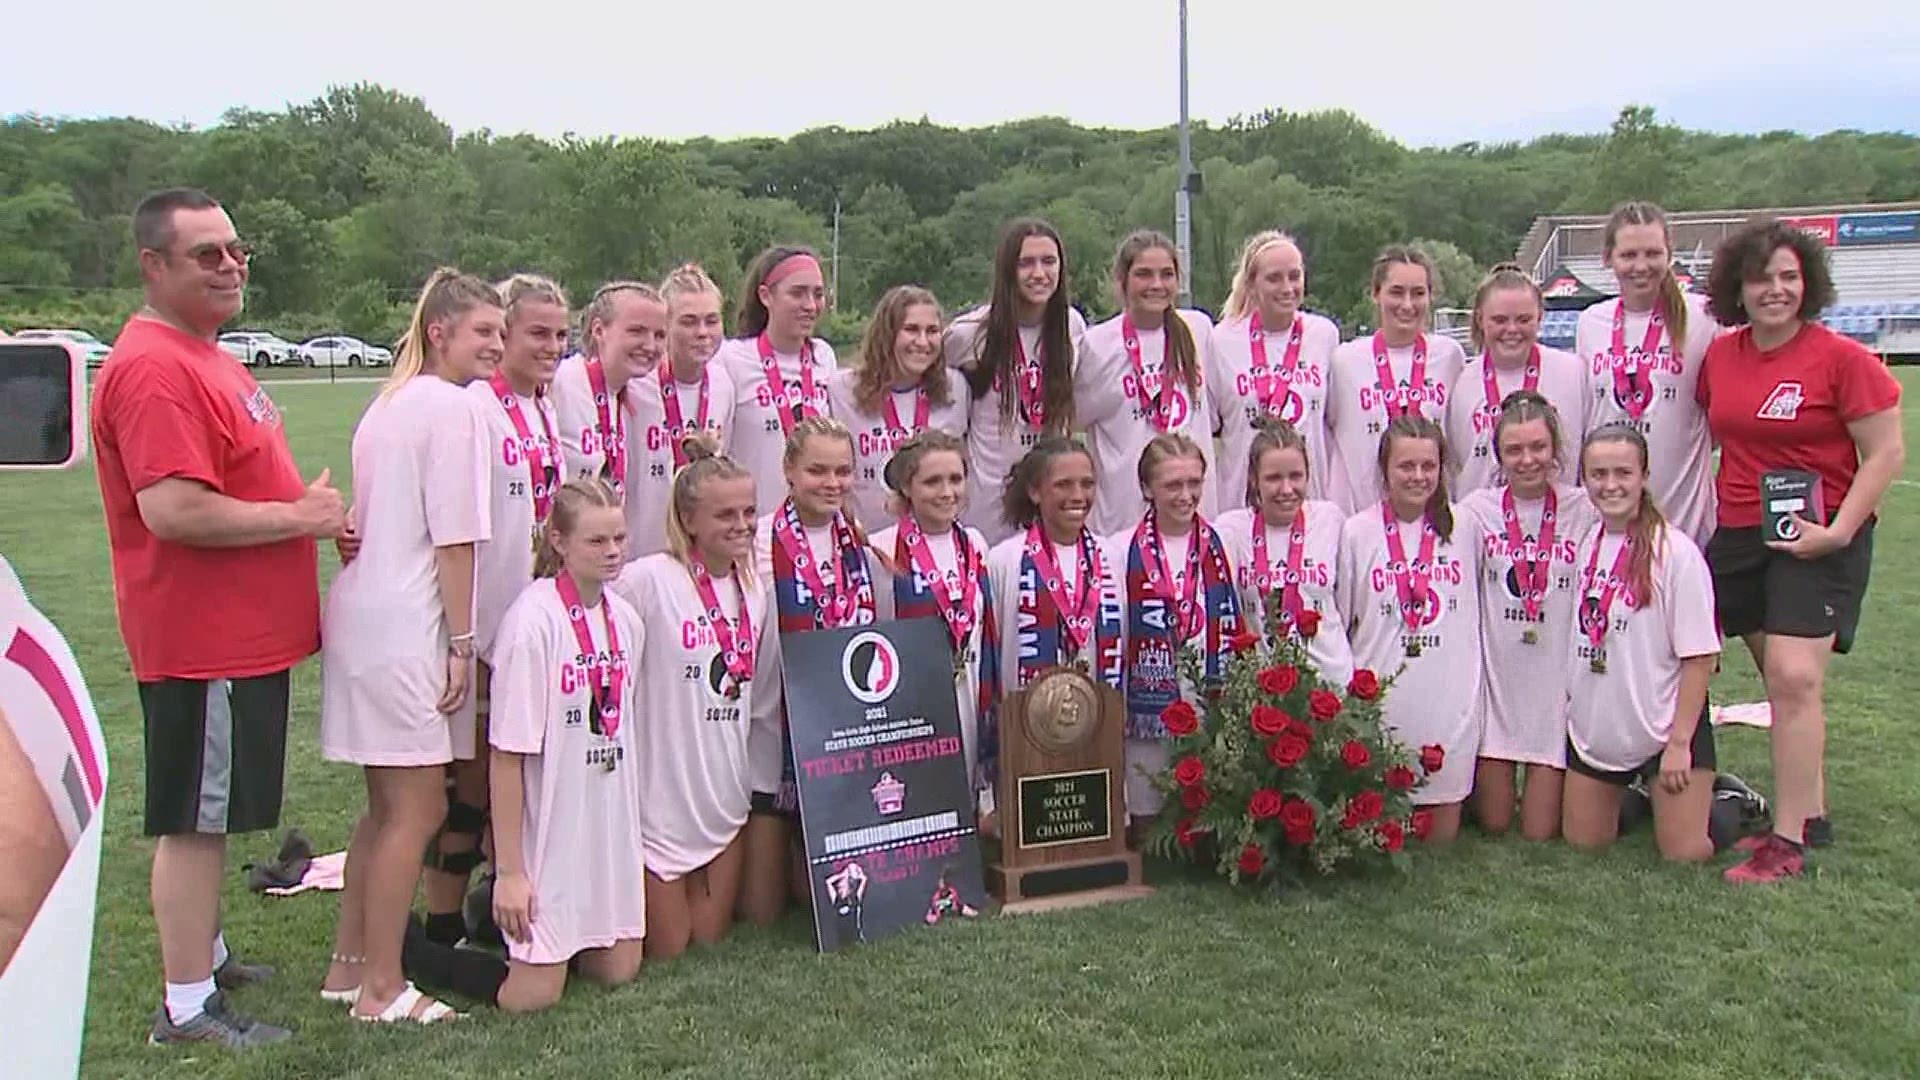 Assumption got 2 goals from Sam Scodeller on their way to a 5th straight 1A State Soccer Championship.